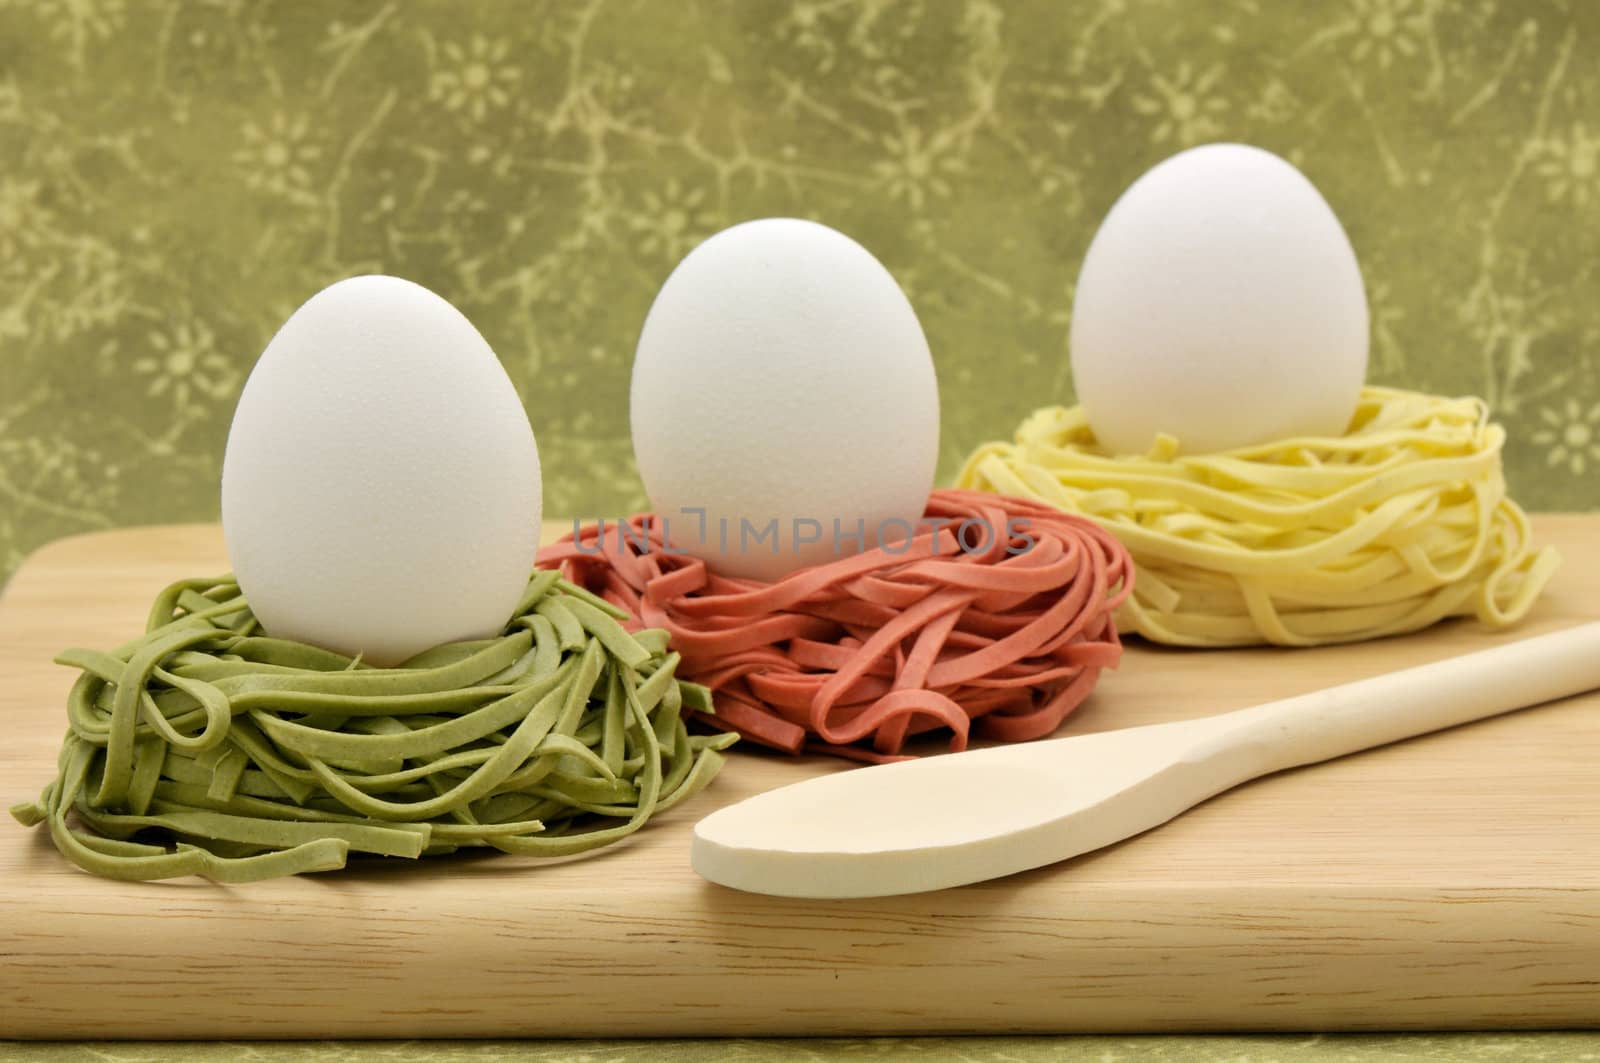 Fresh Italian pasta nests with eggs ready to cook